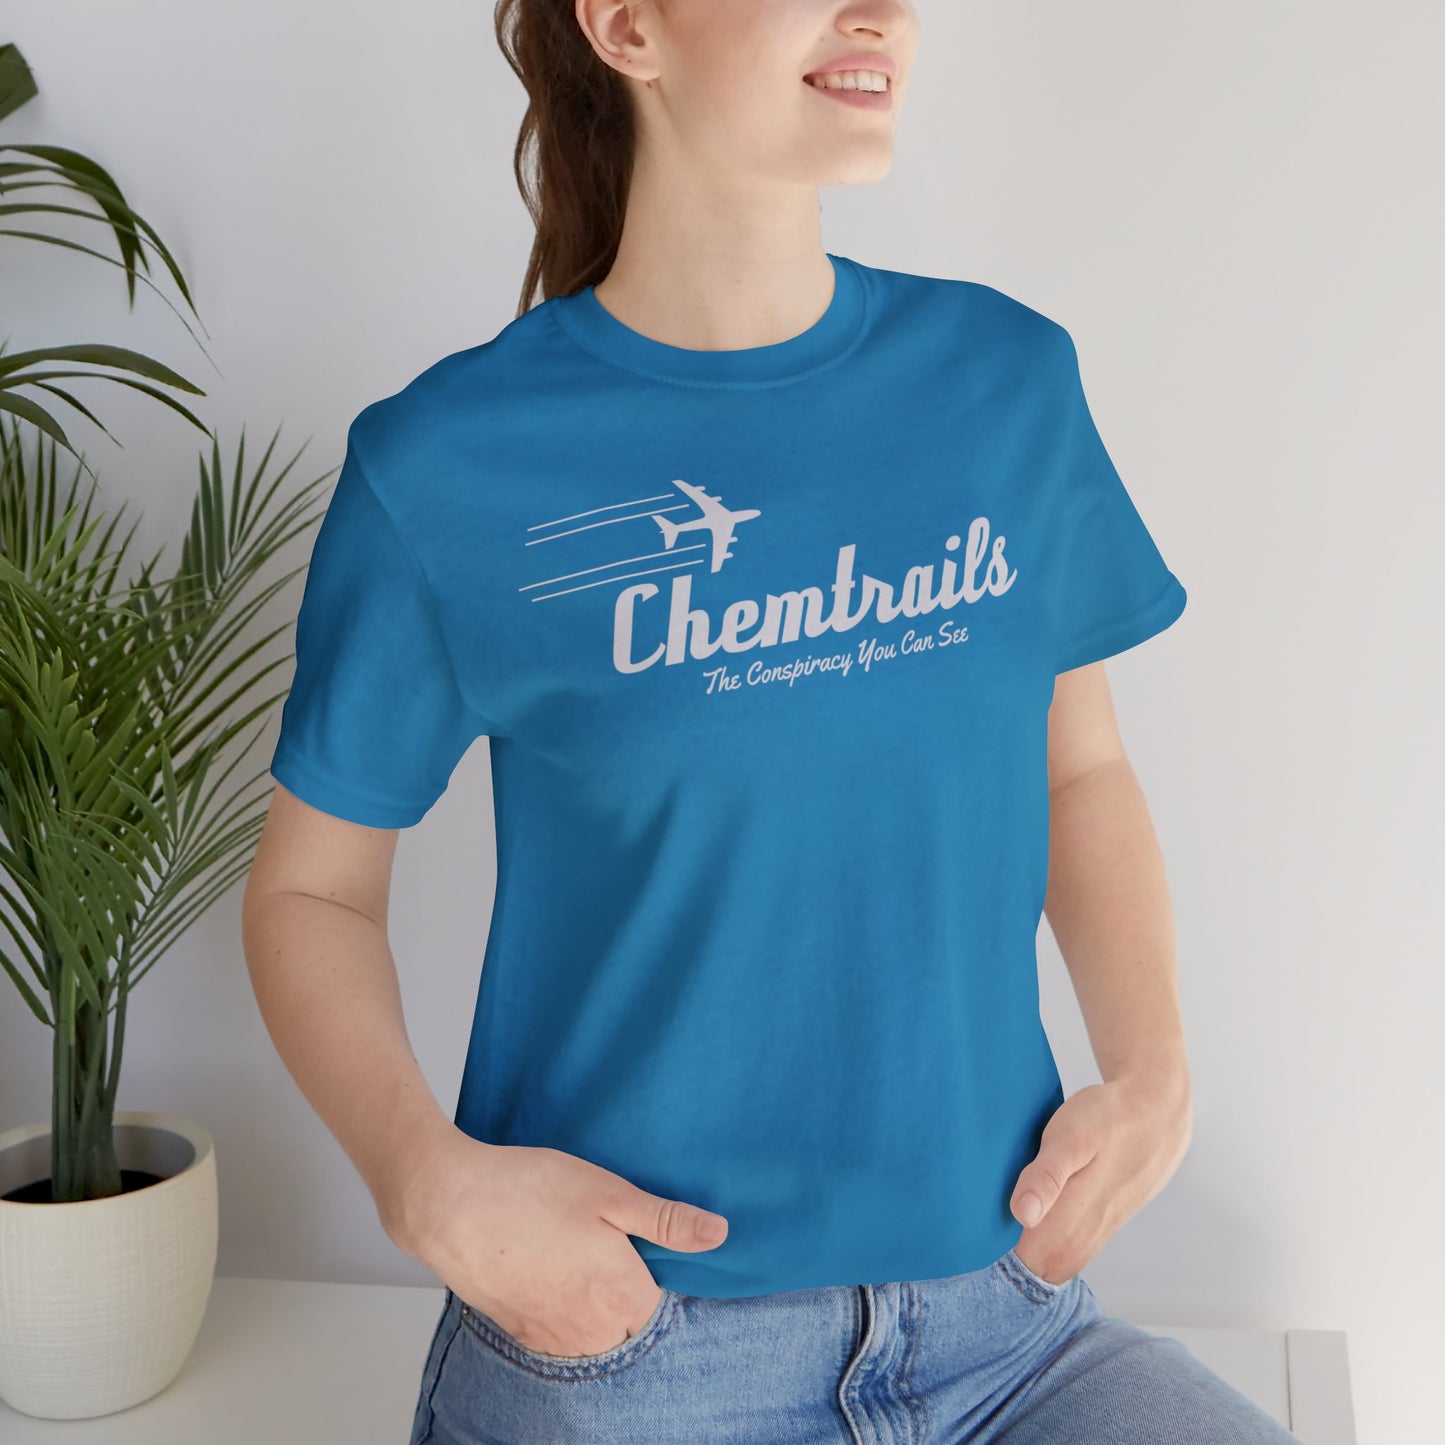 Chemtrails The Consipracy You Can See Unisex Jersey Short Sleeve Tee